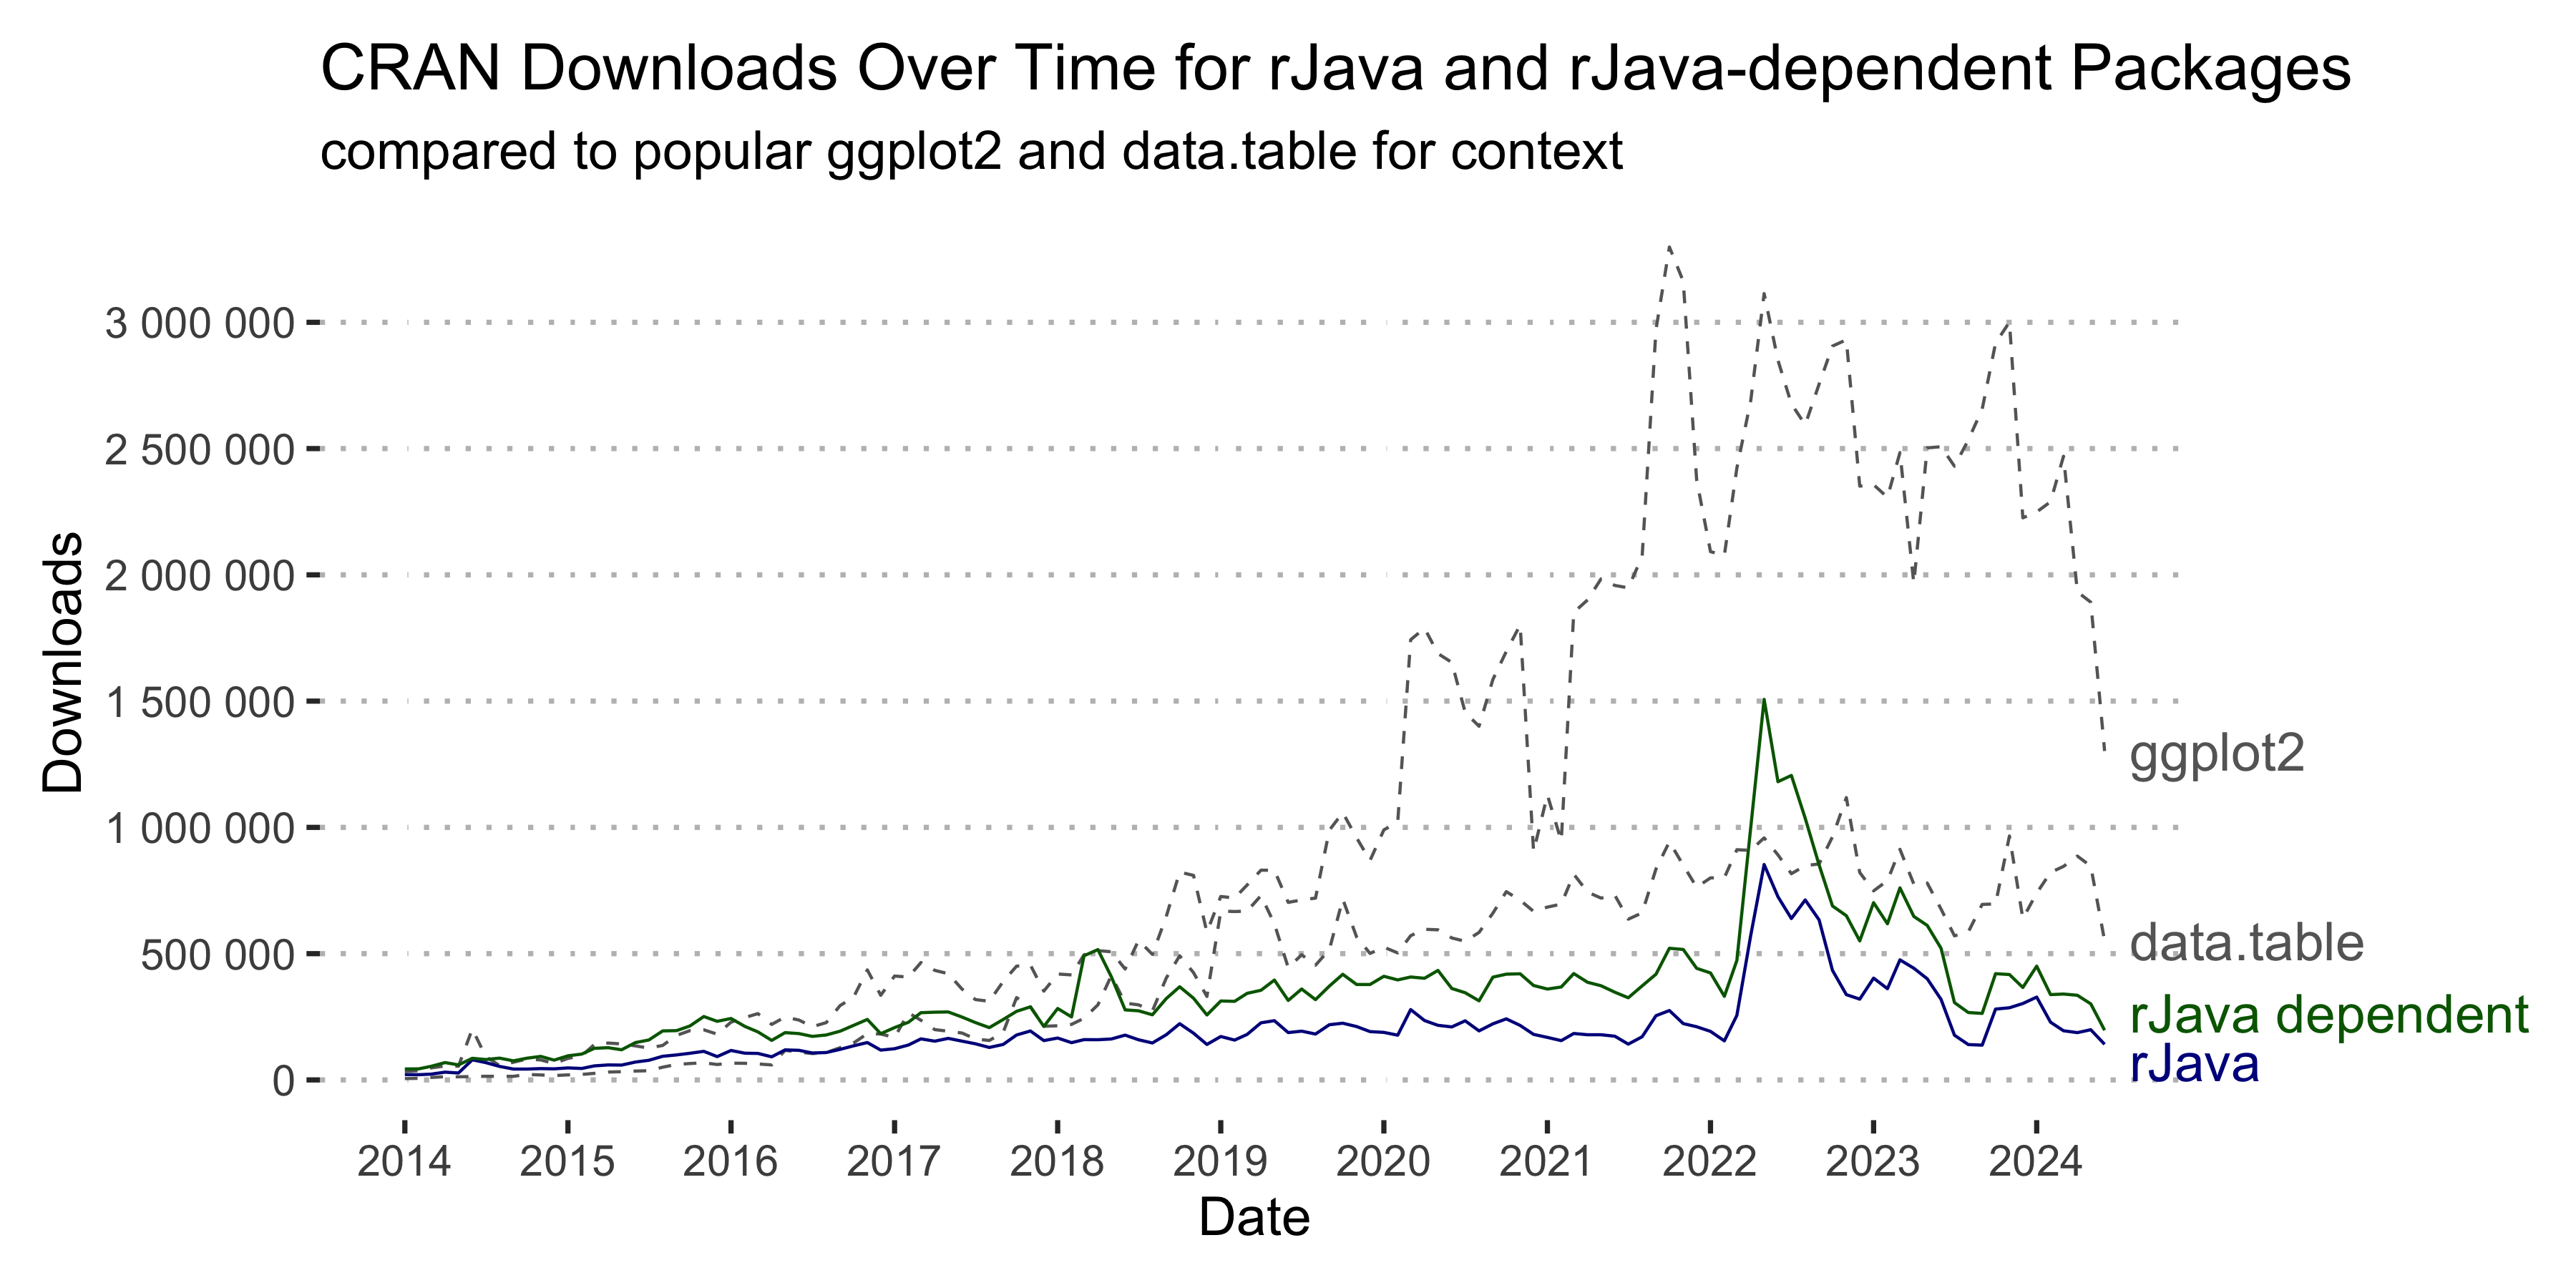 CRAN Downloads Over Time for rJava and rJava-dependent Packages, compared to popular ggplot2 and data.table for context